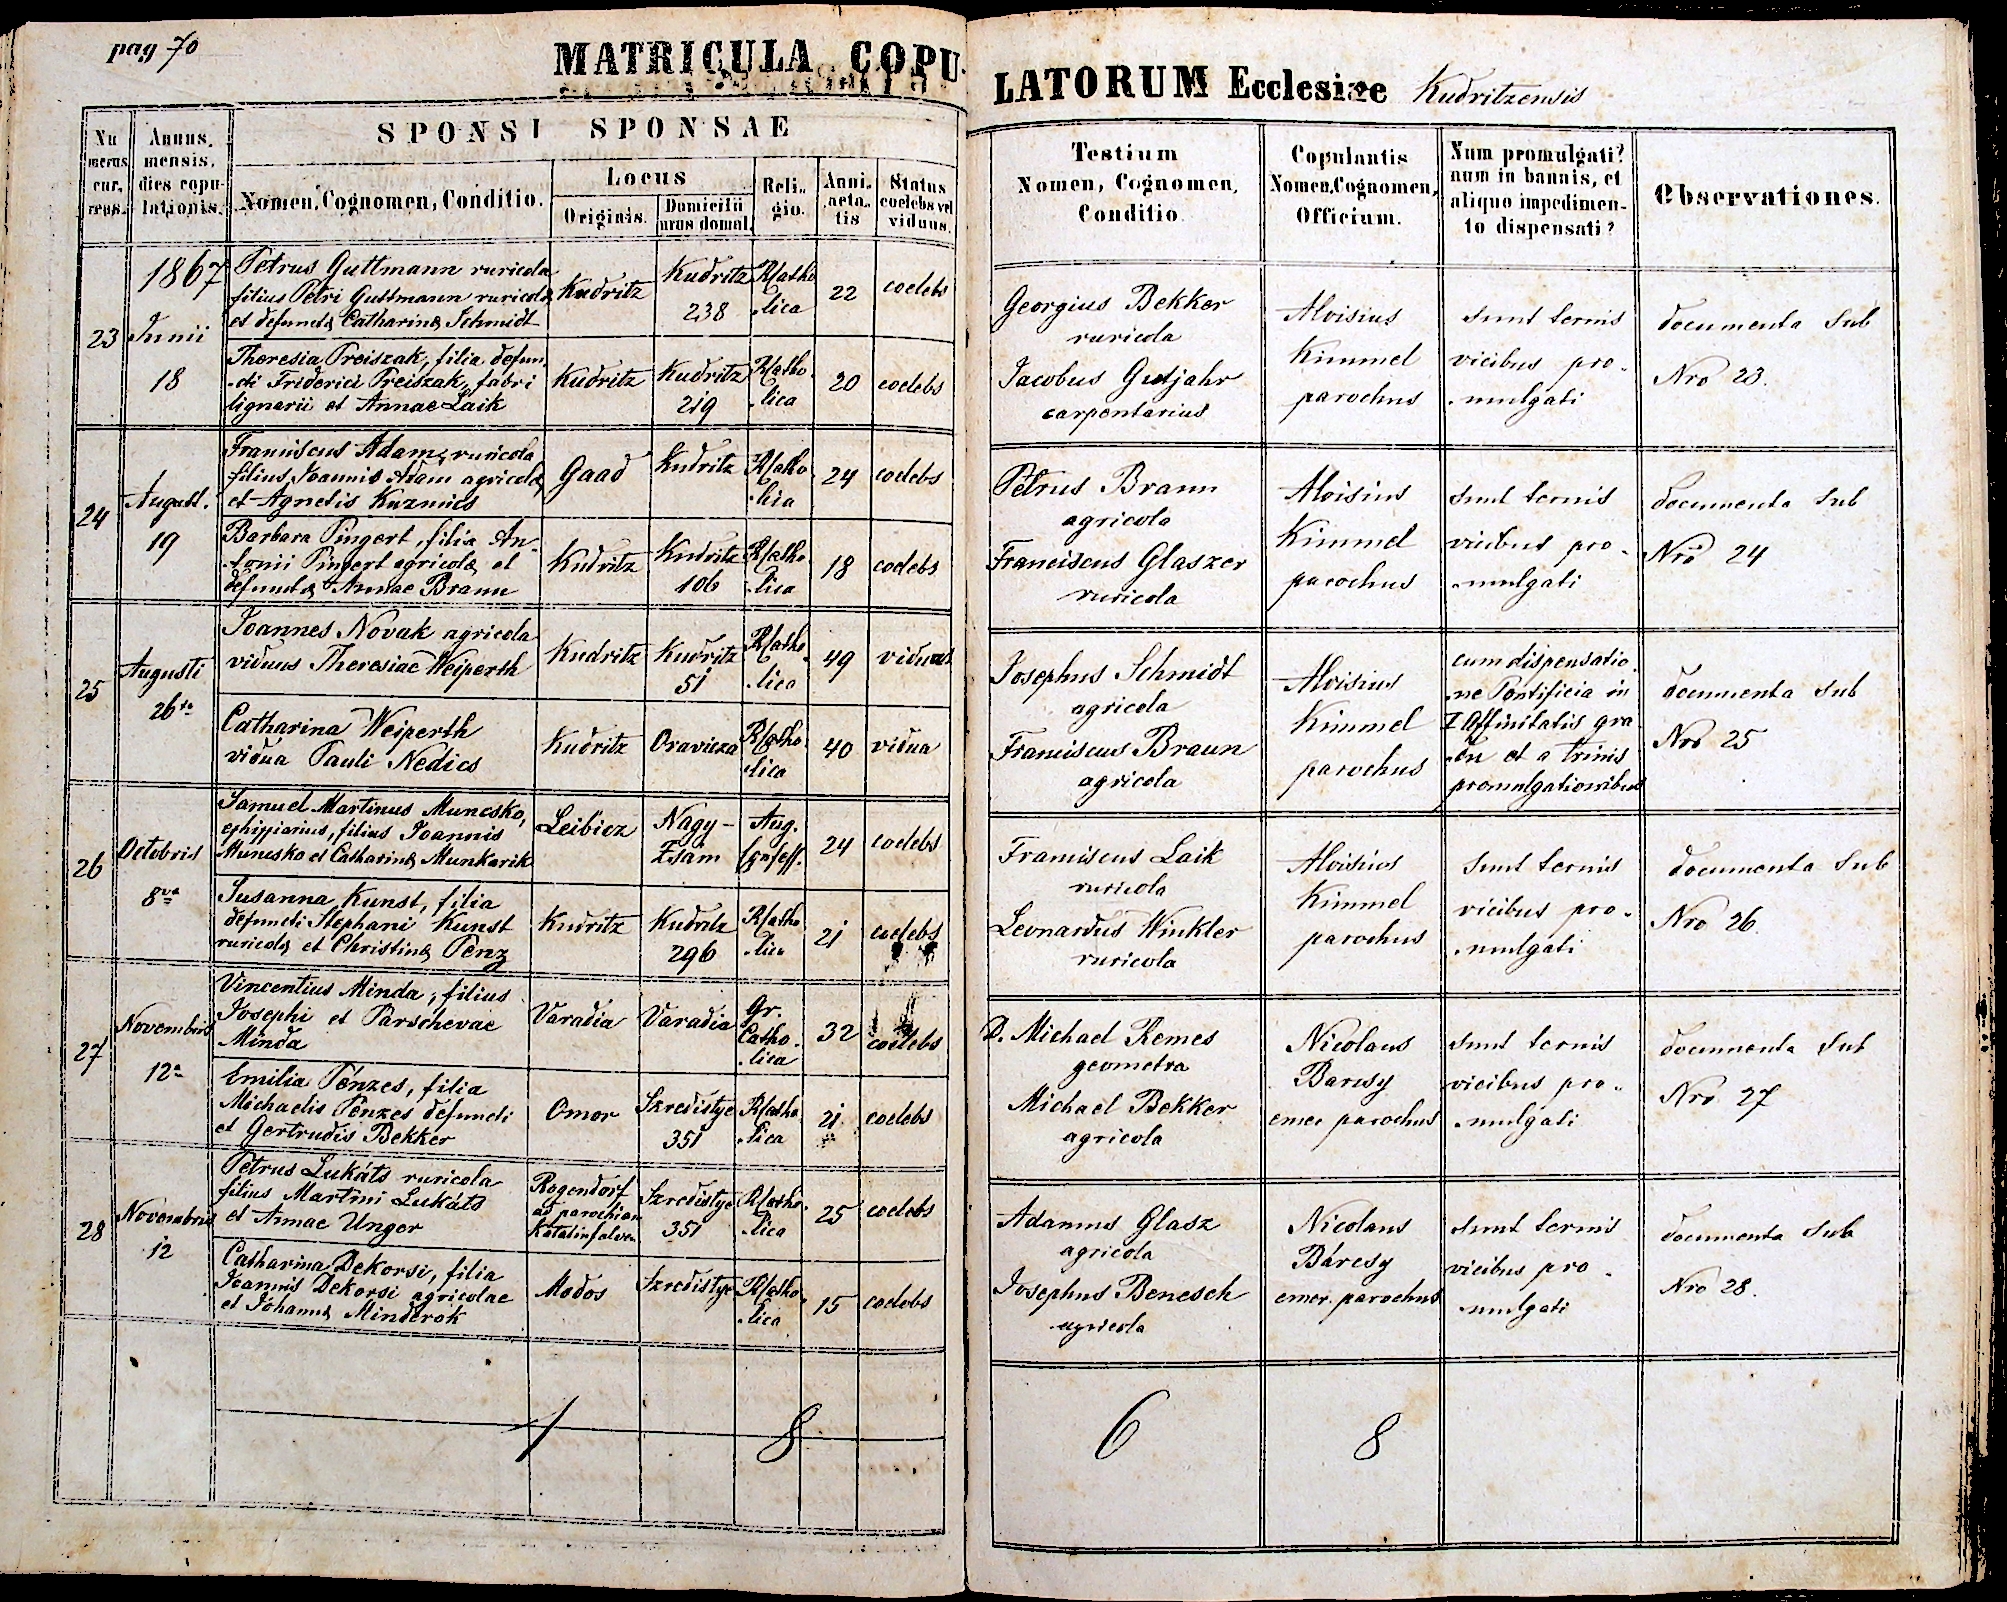 images/church_records/MARRIAGES/1852-1871M/070